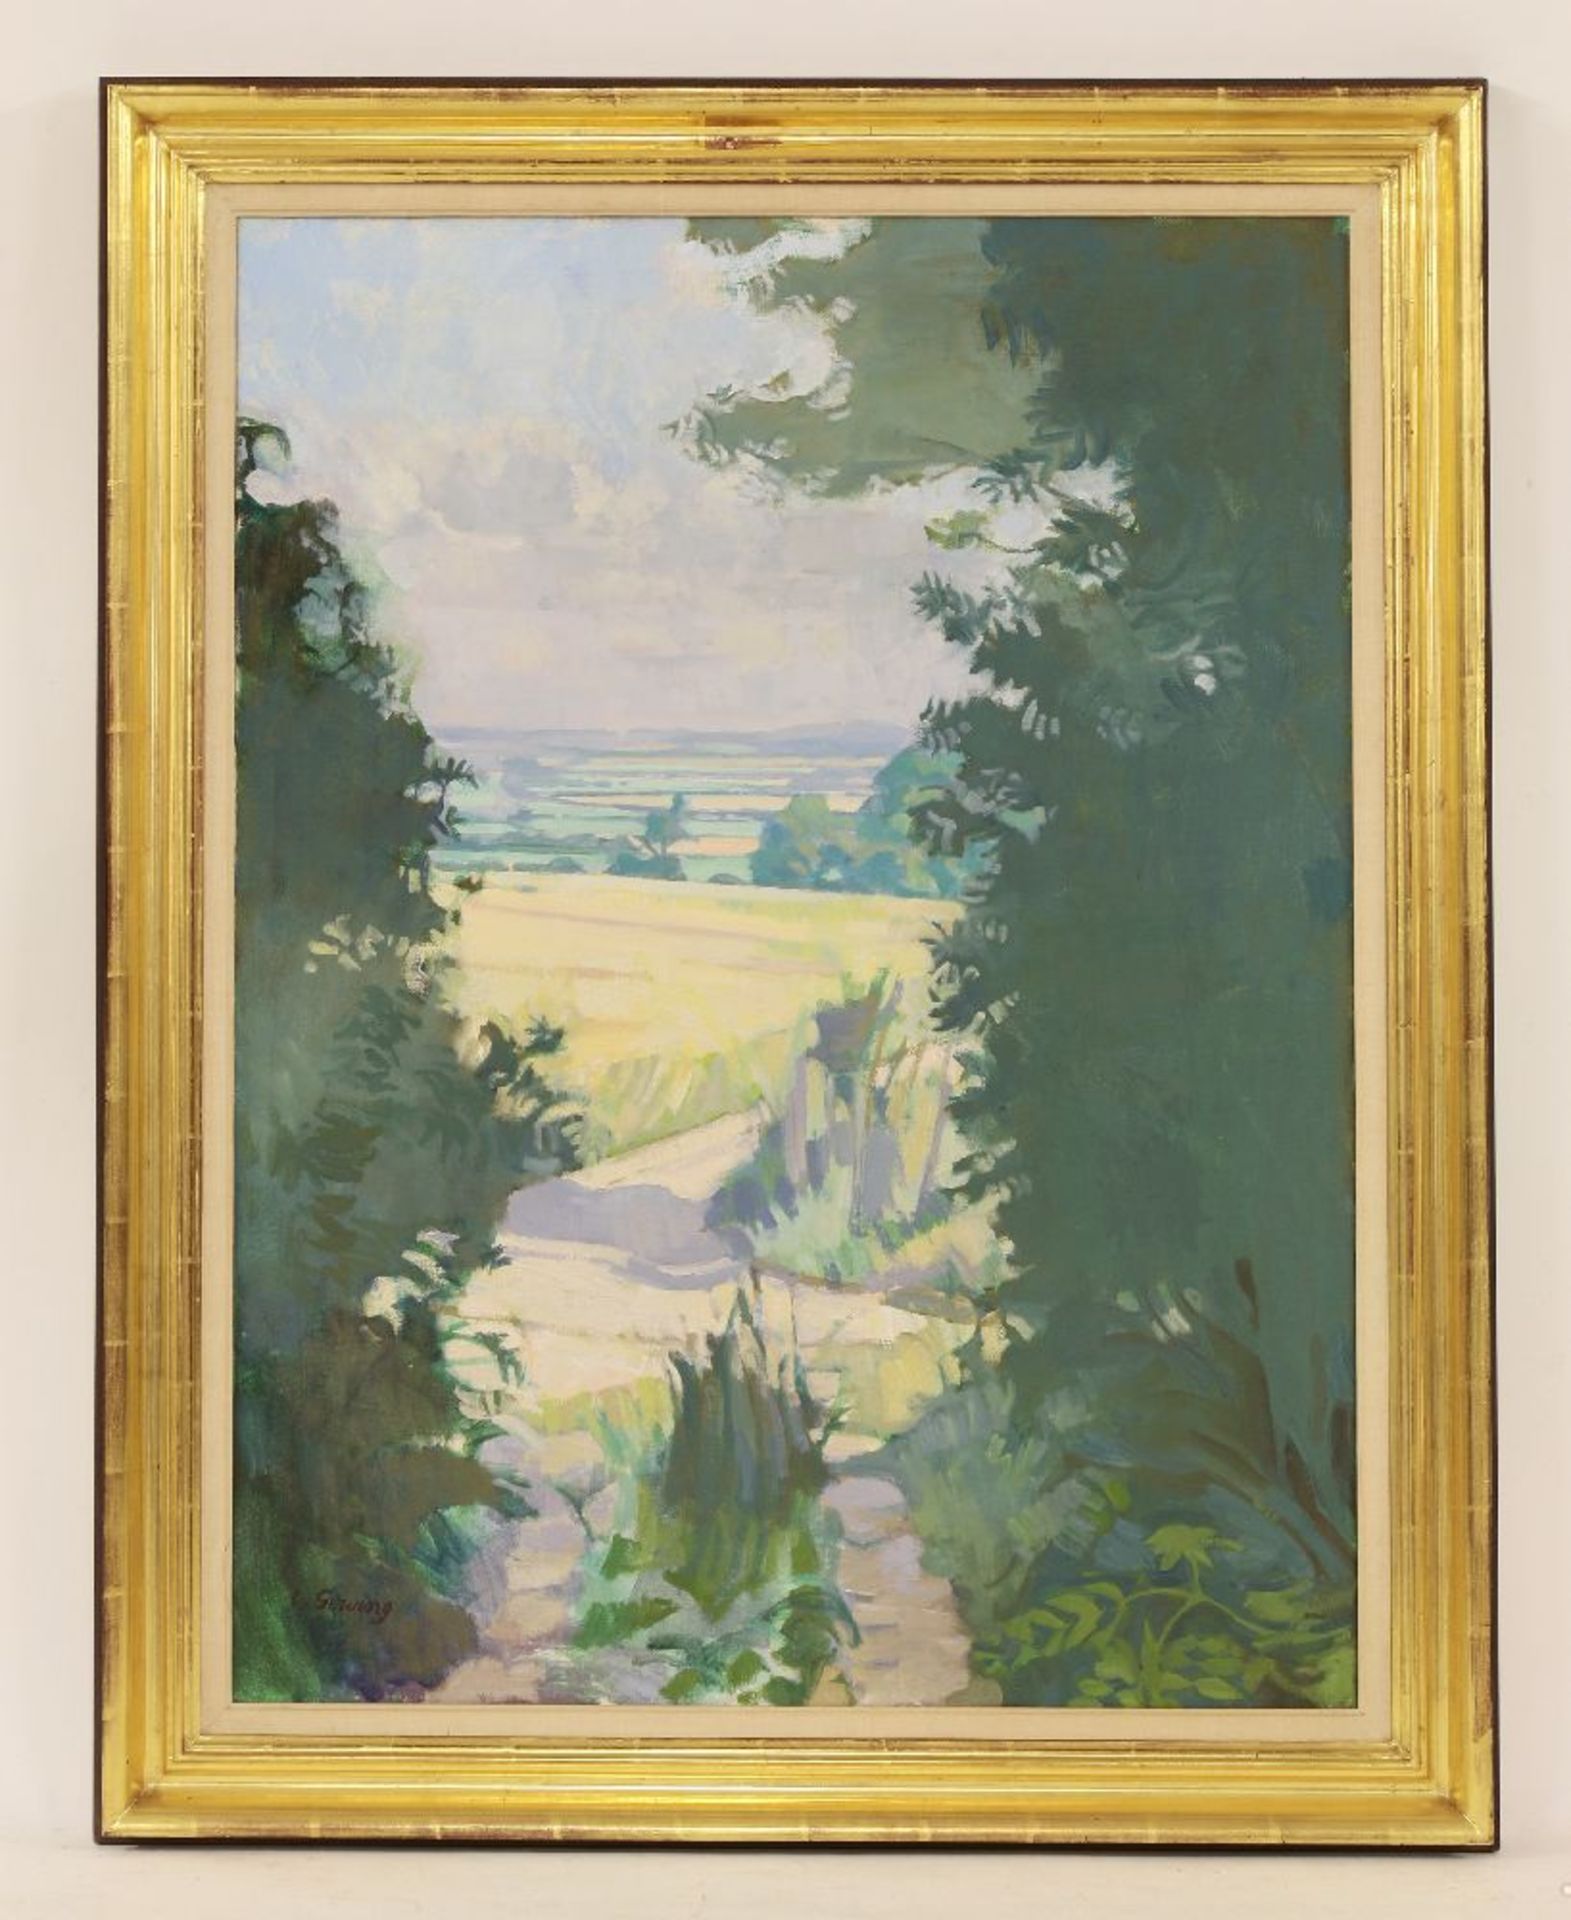 *Sir Lawrence Gowing RA (1918-1991)A SUNLIT LANDSCAPESigned l.l., oil on canvas92 x 71cm*Artist's - Image 2 of 4